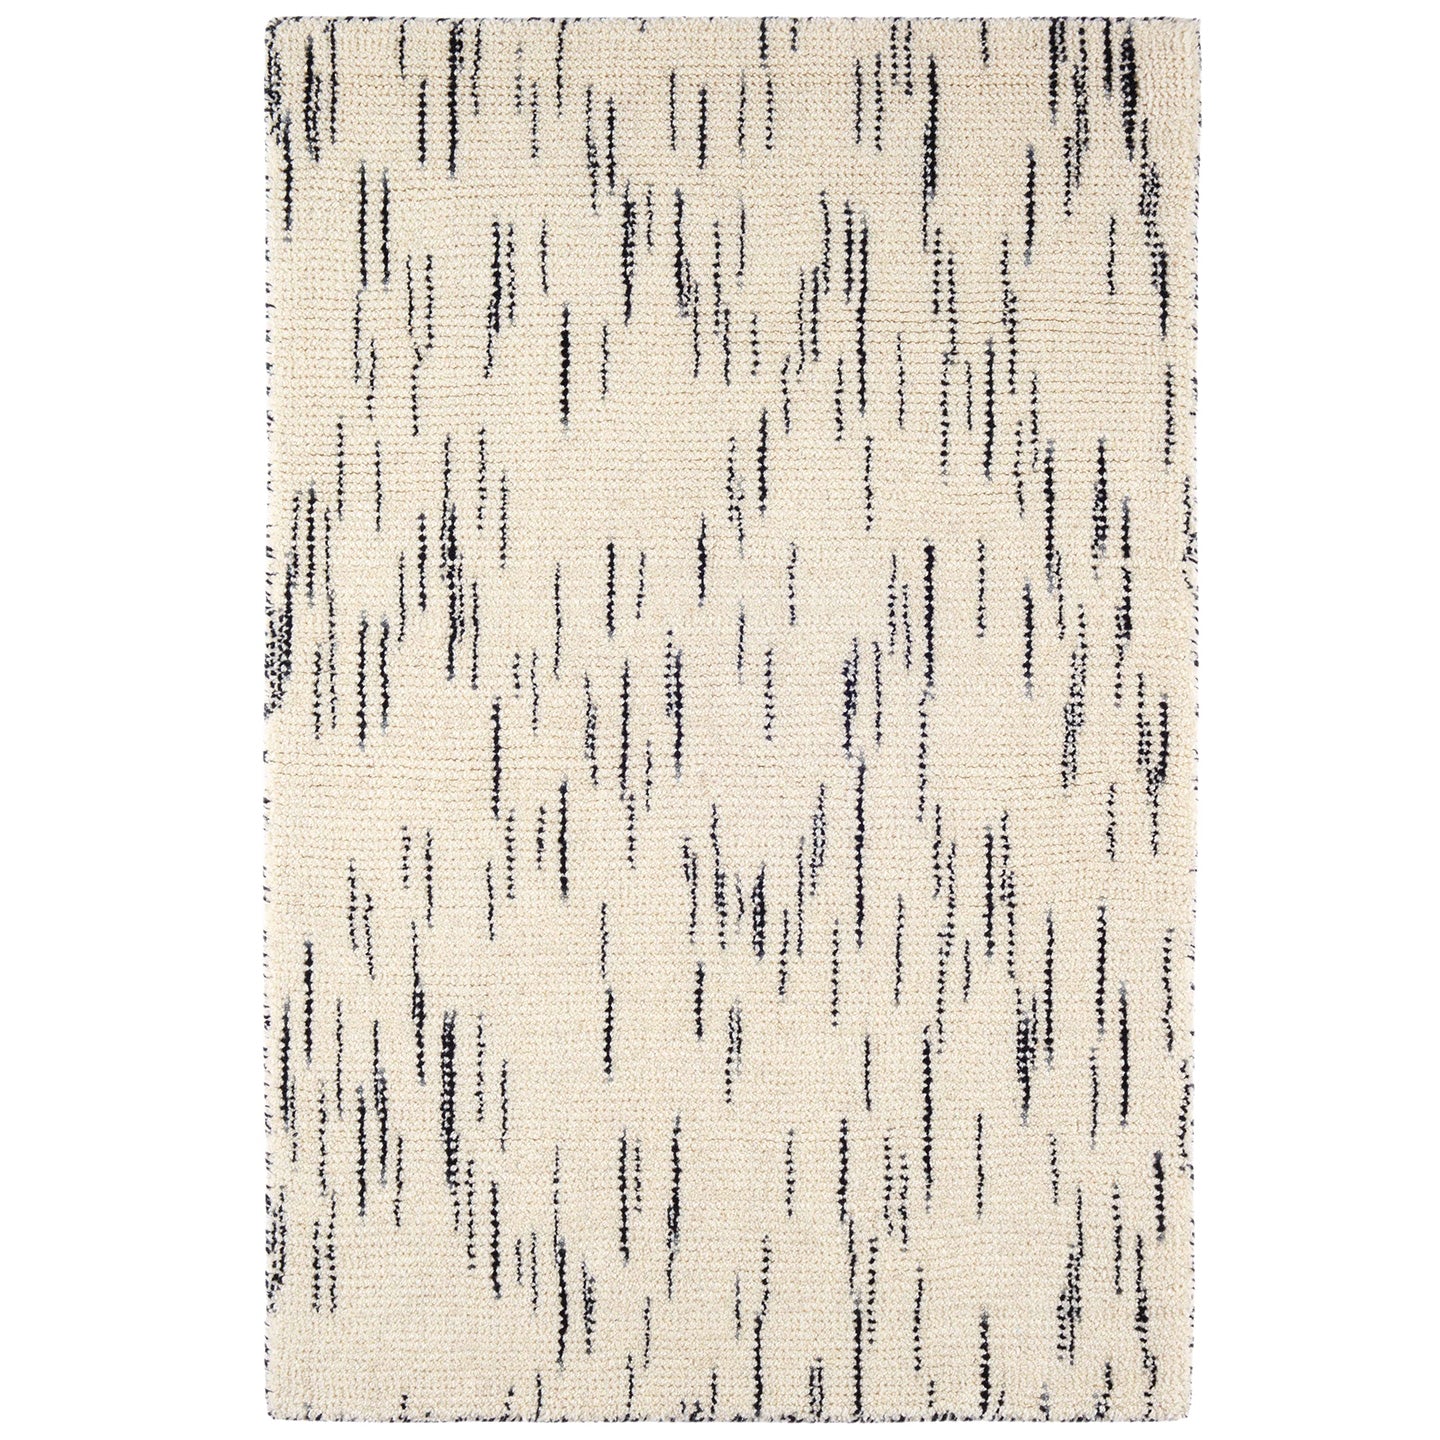 Ozzie Black/White Loom Knotted Wool Rug